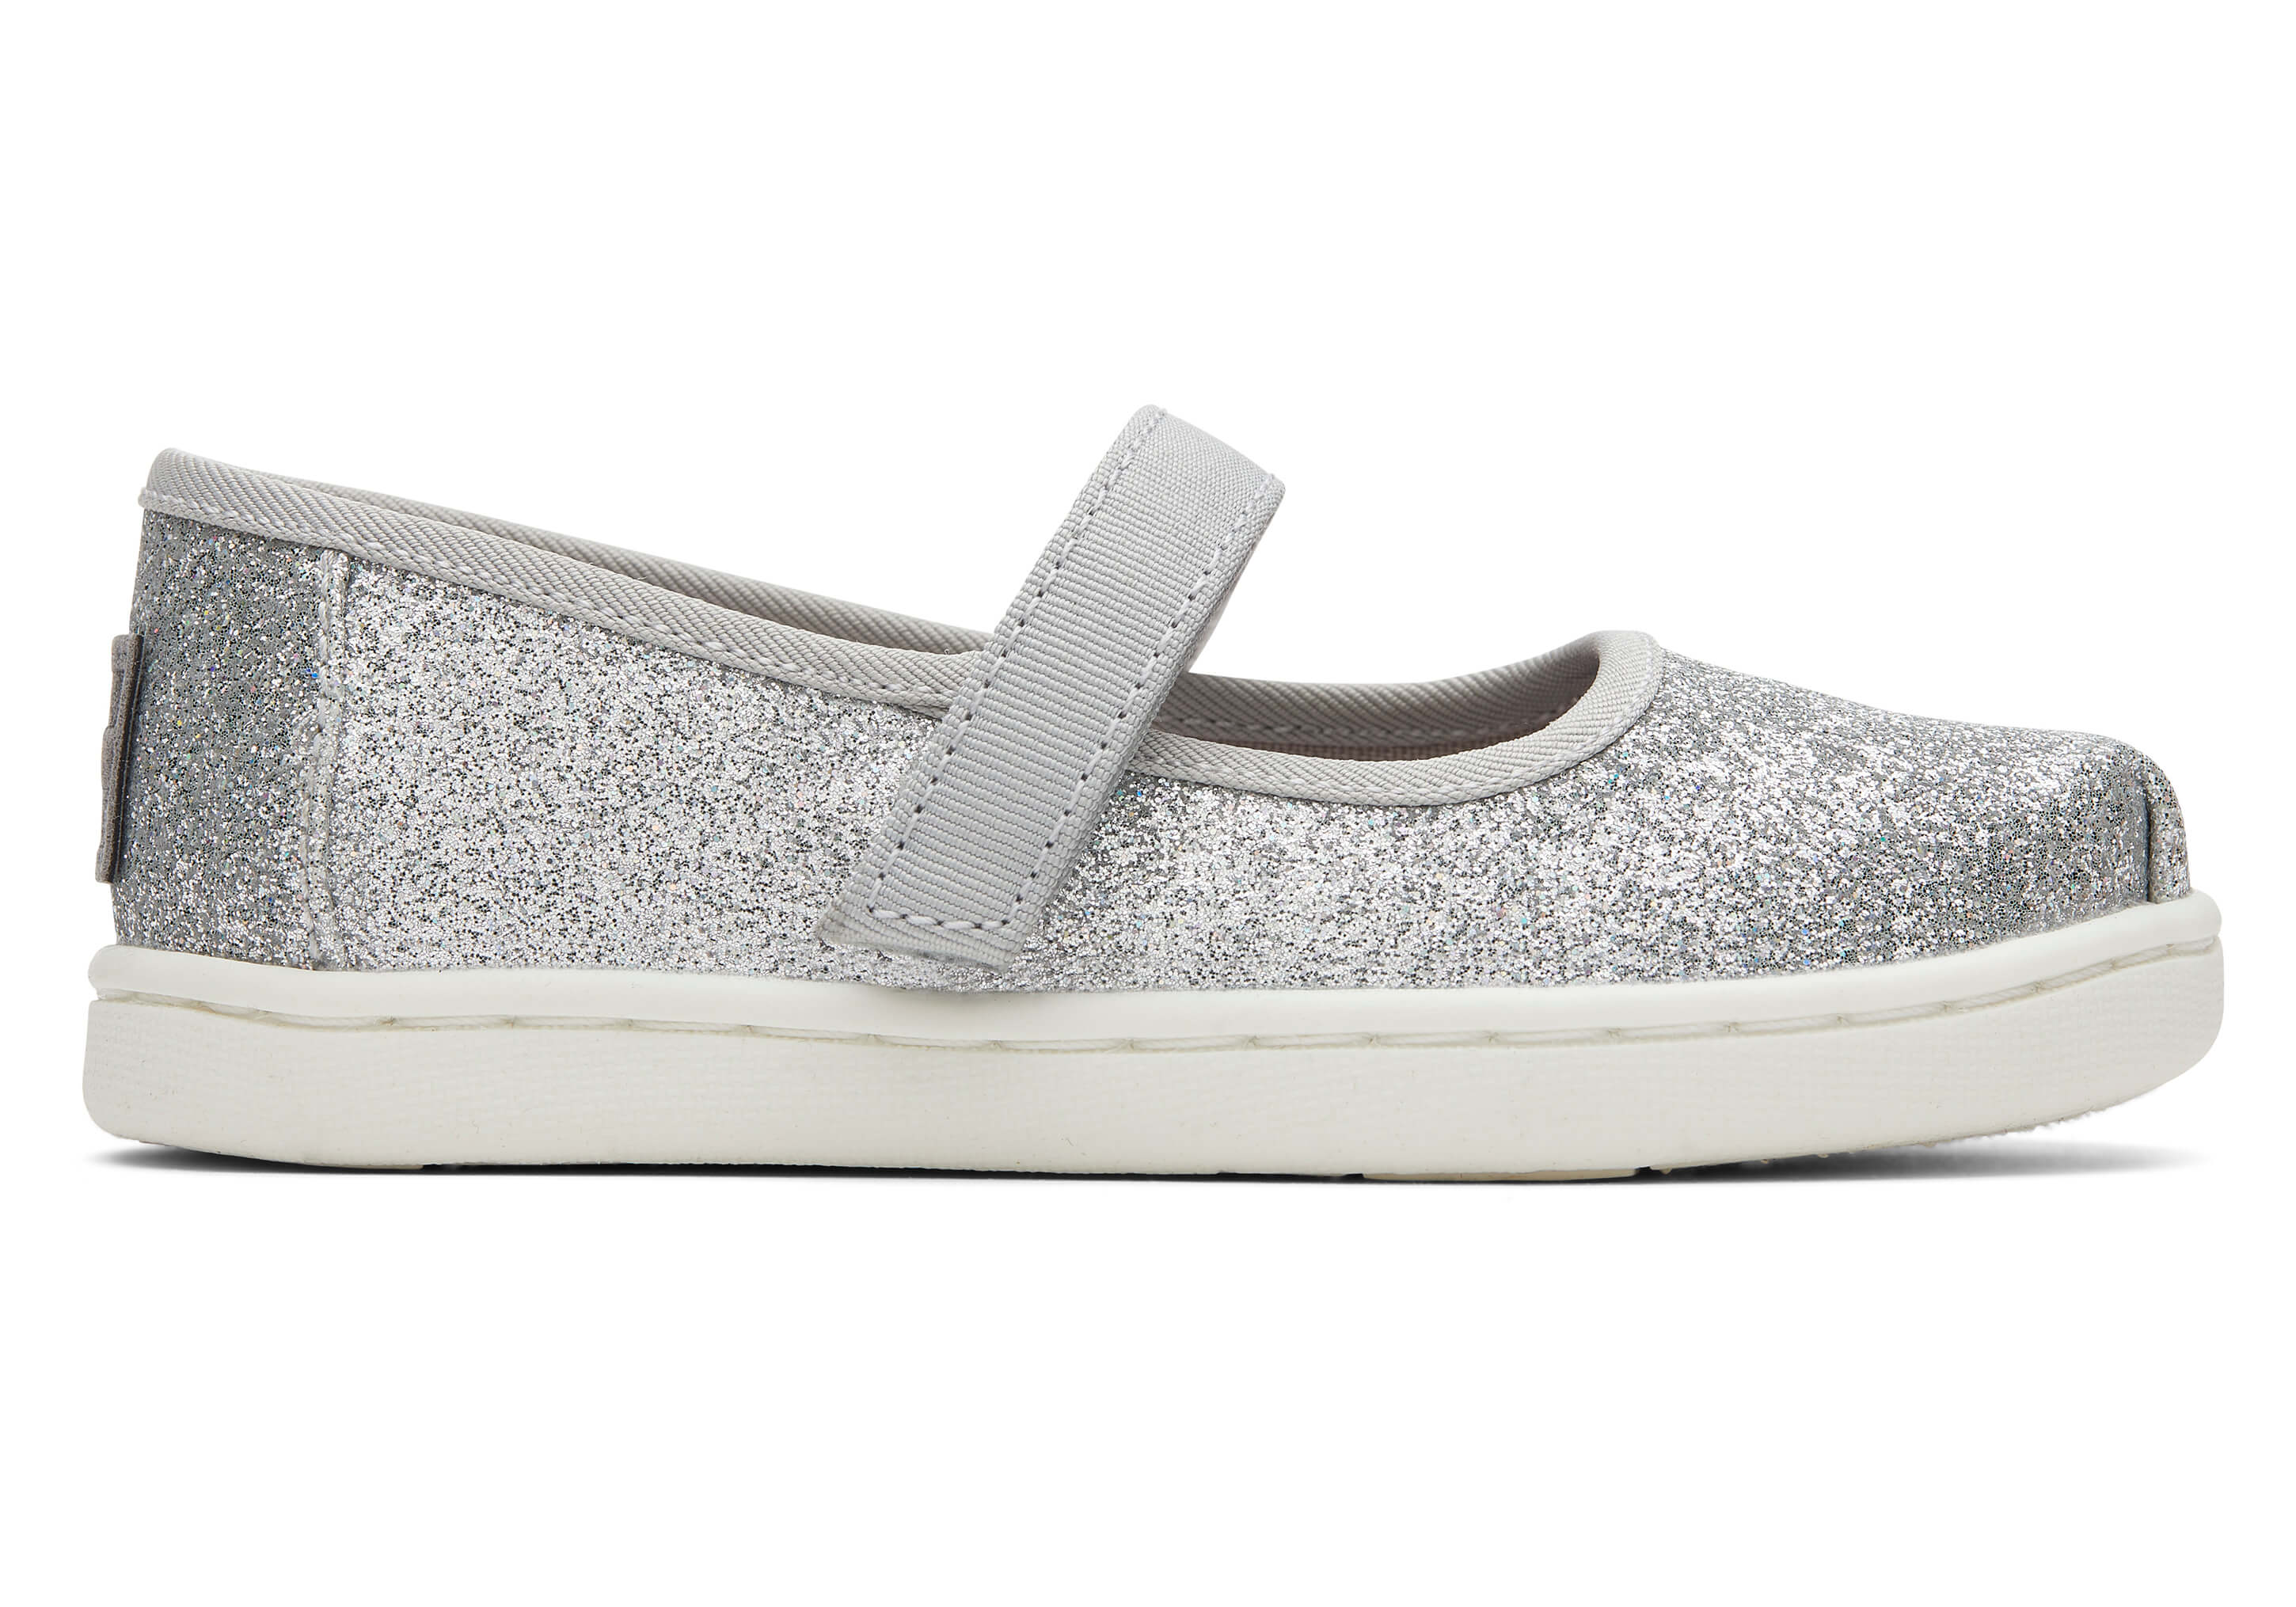 Details about  / Toms Girls Classic Slip-On shoes Silver Herringbone  10003594 Size 1.5 youth